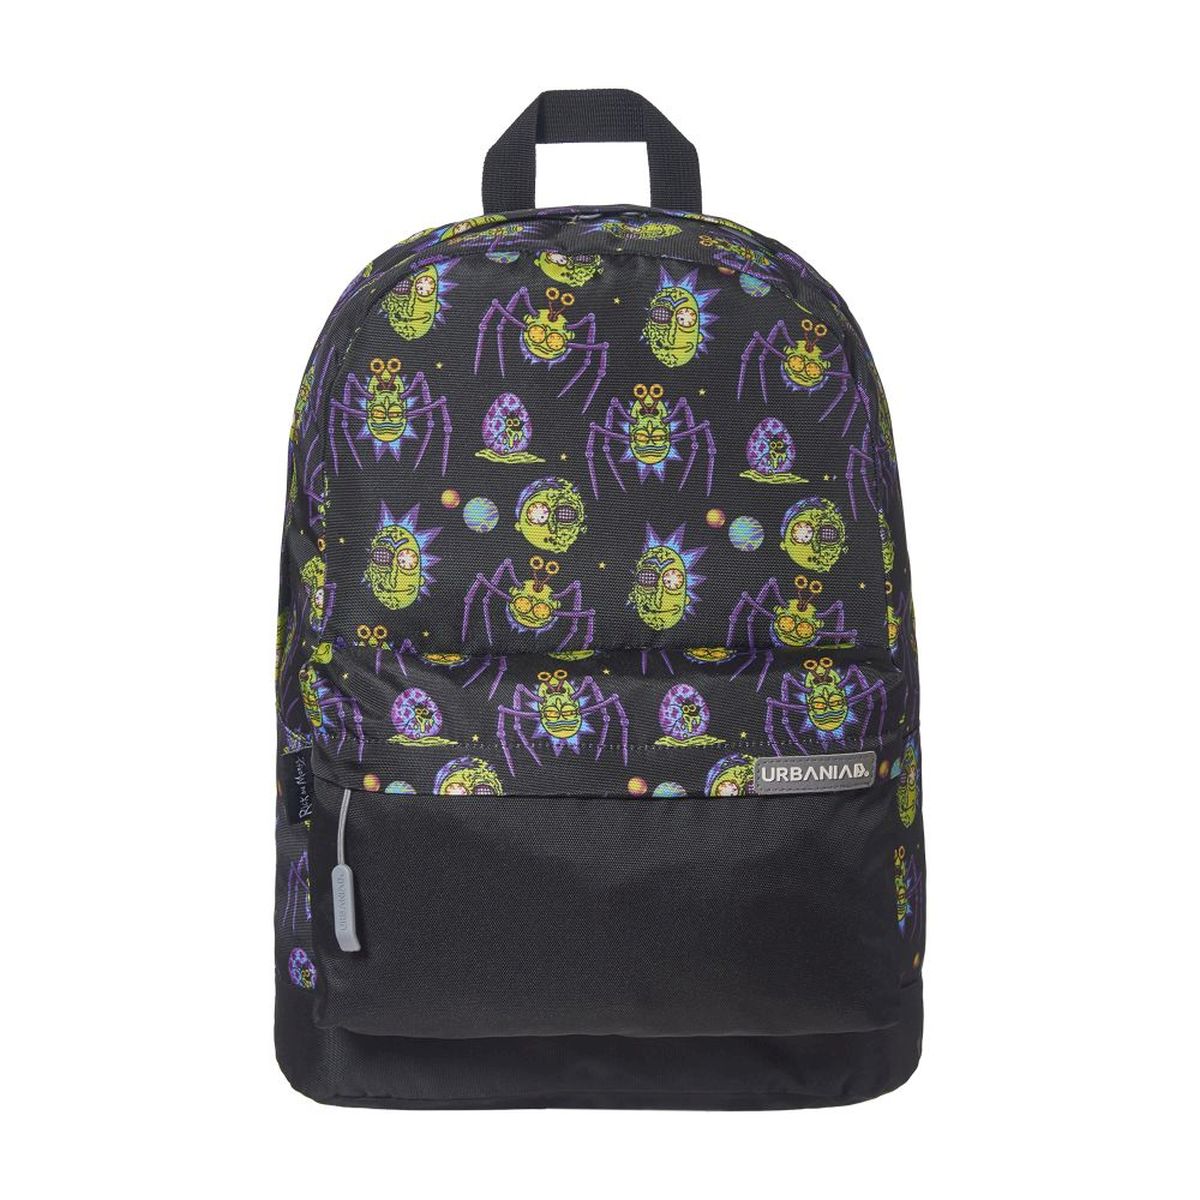 Backpack Collab Rick and Morty Poses